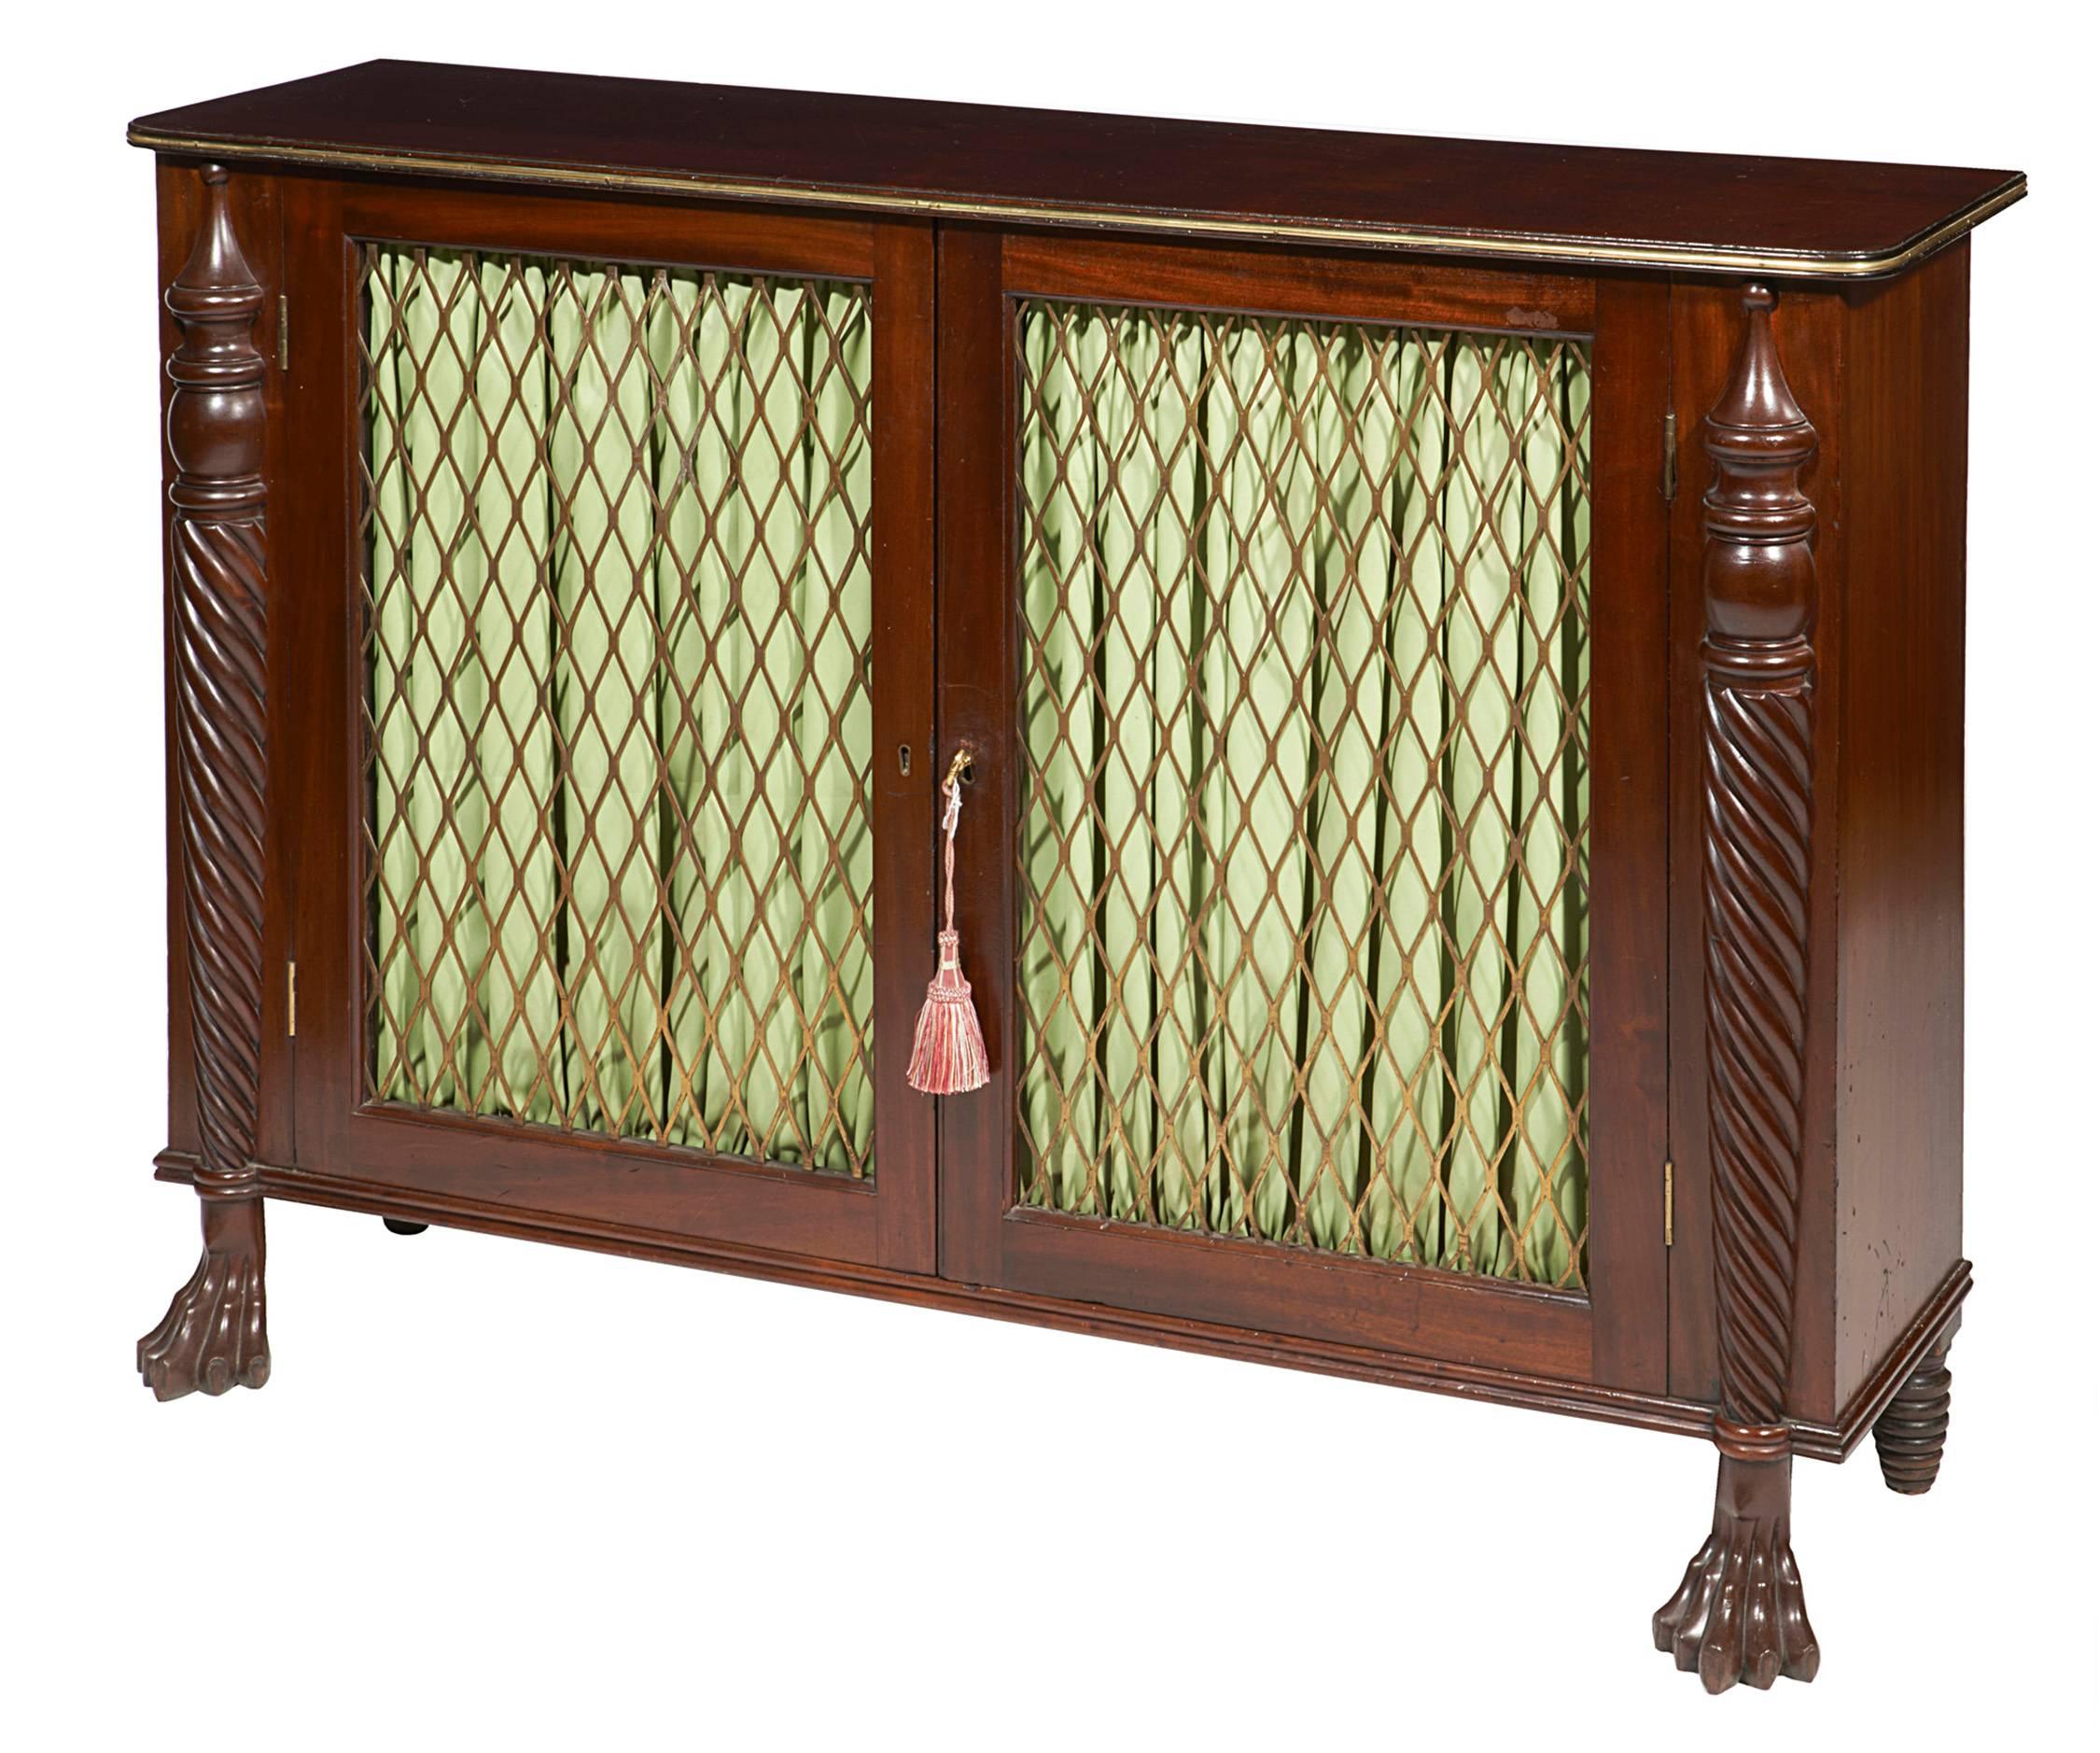 William IV Mahogany Brass Grill Cabinet In Excellent Condition For Sale In New York, NY